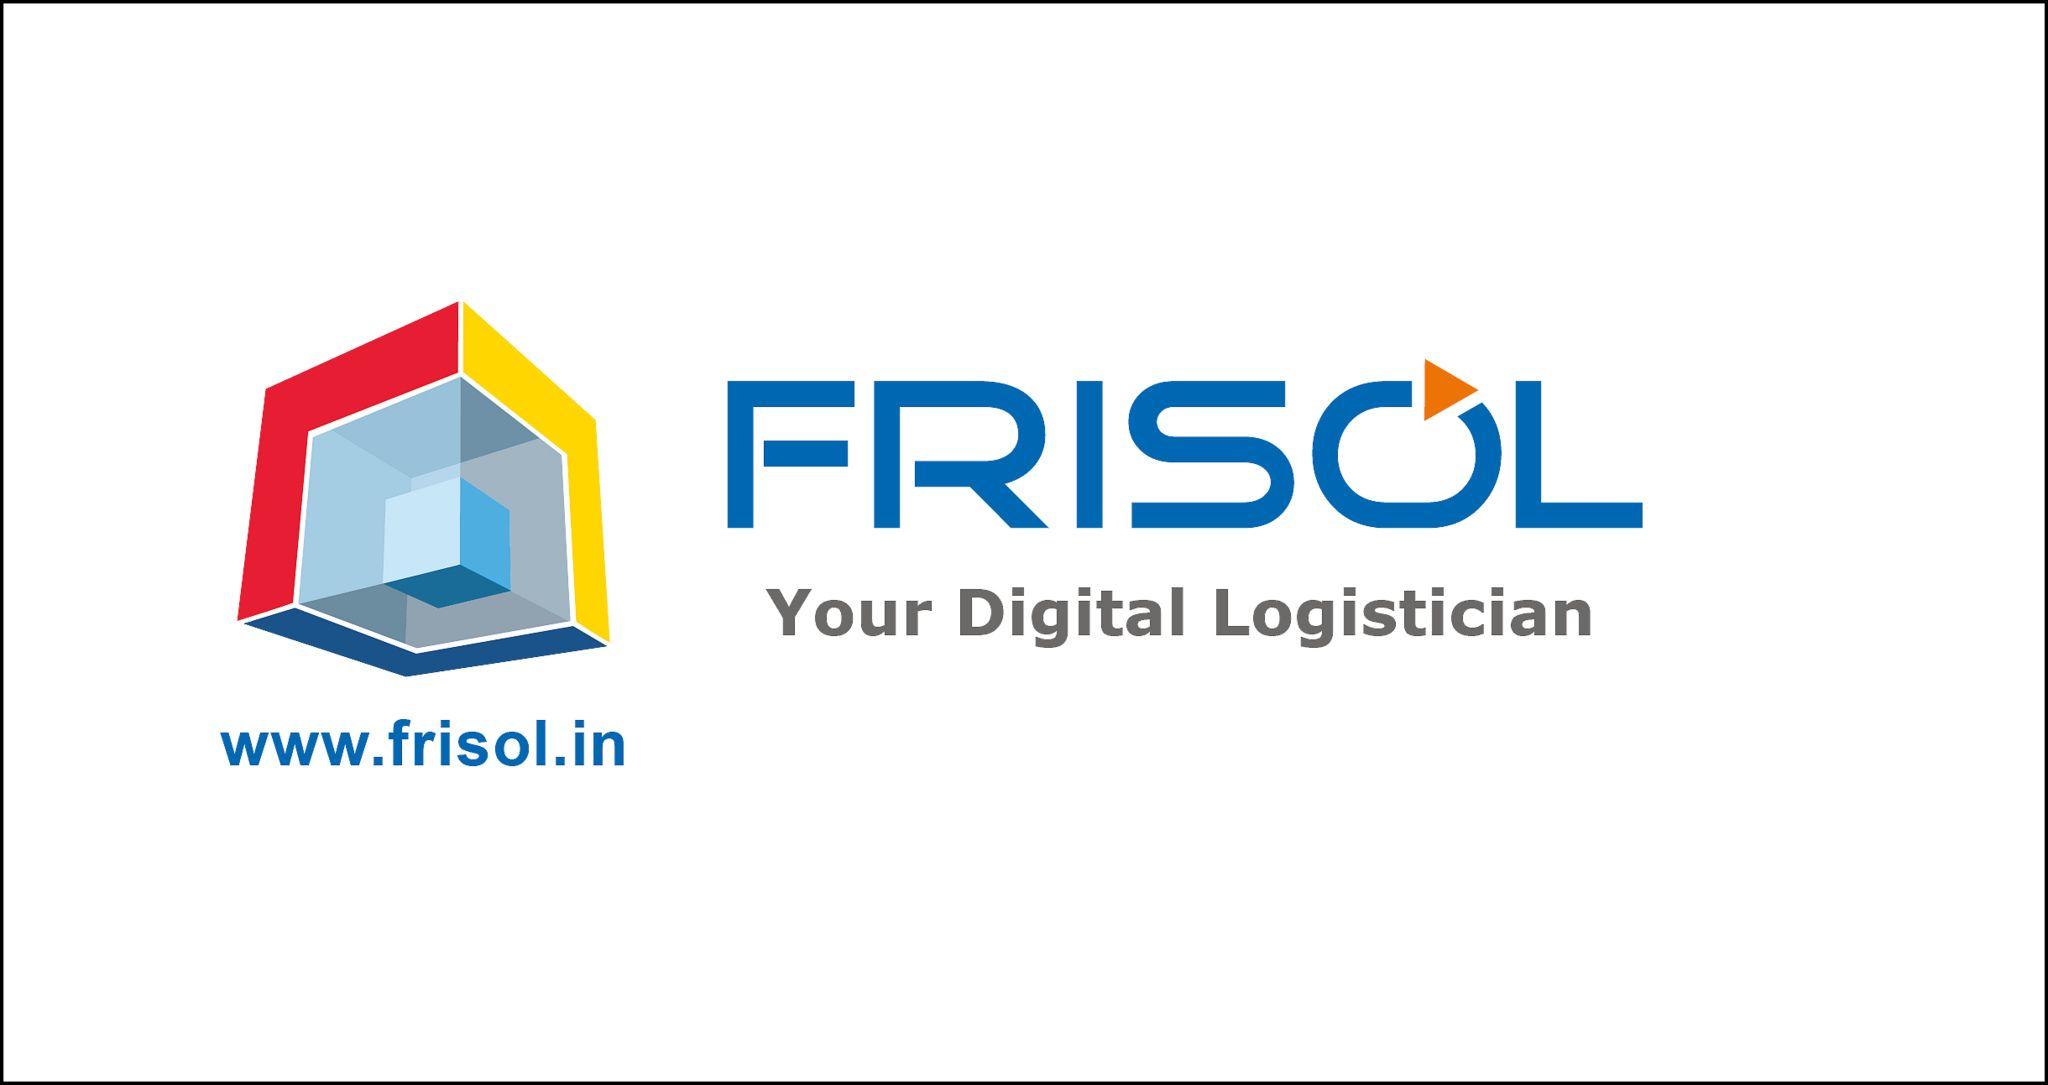 1st Look Logo - FRISOL logo 1st look. The first look of FRISOL logo with th